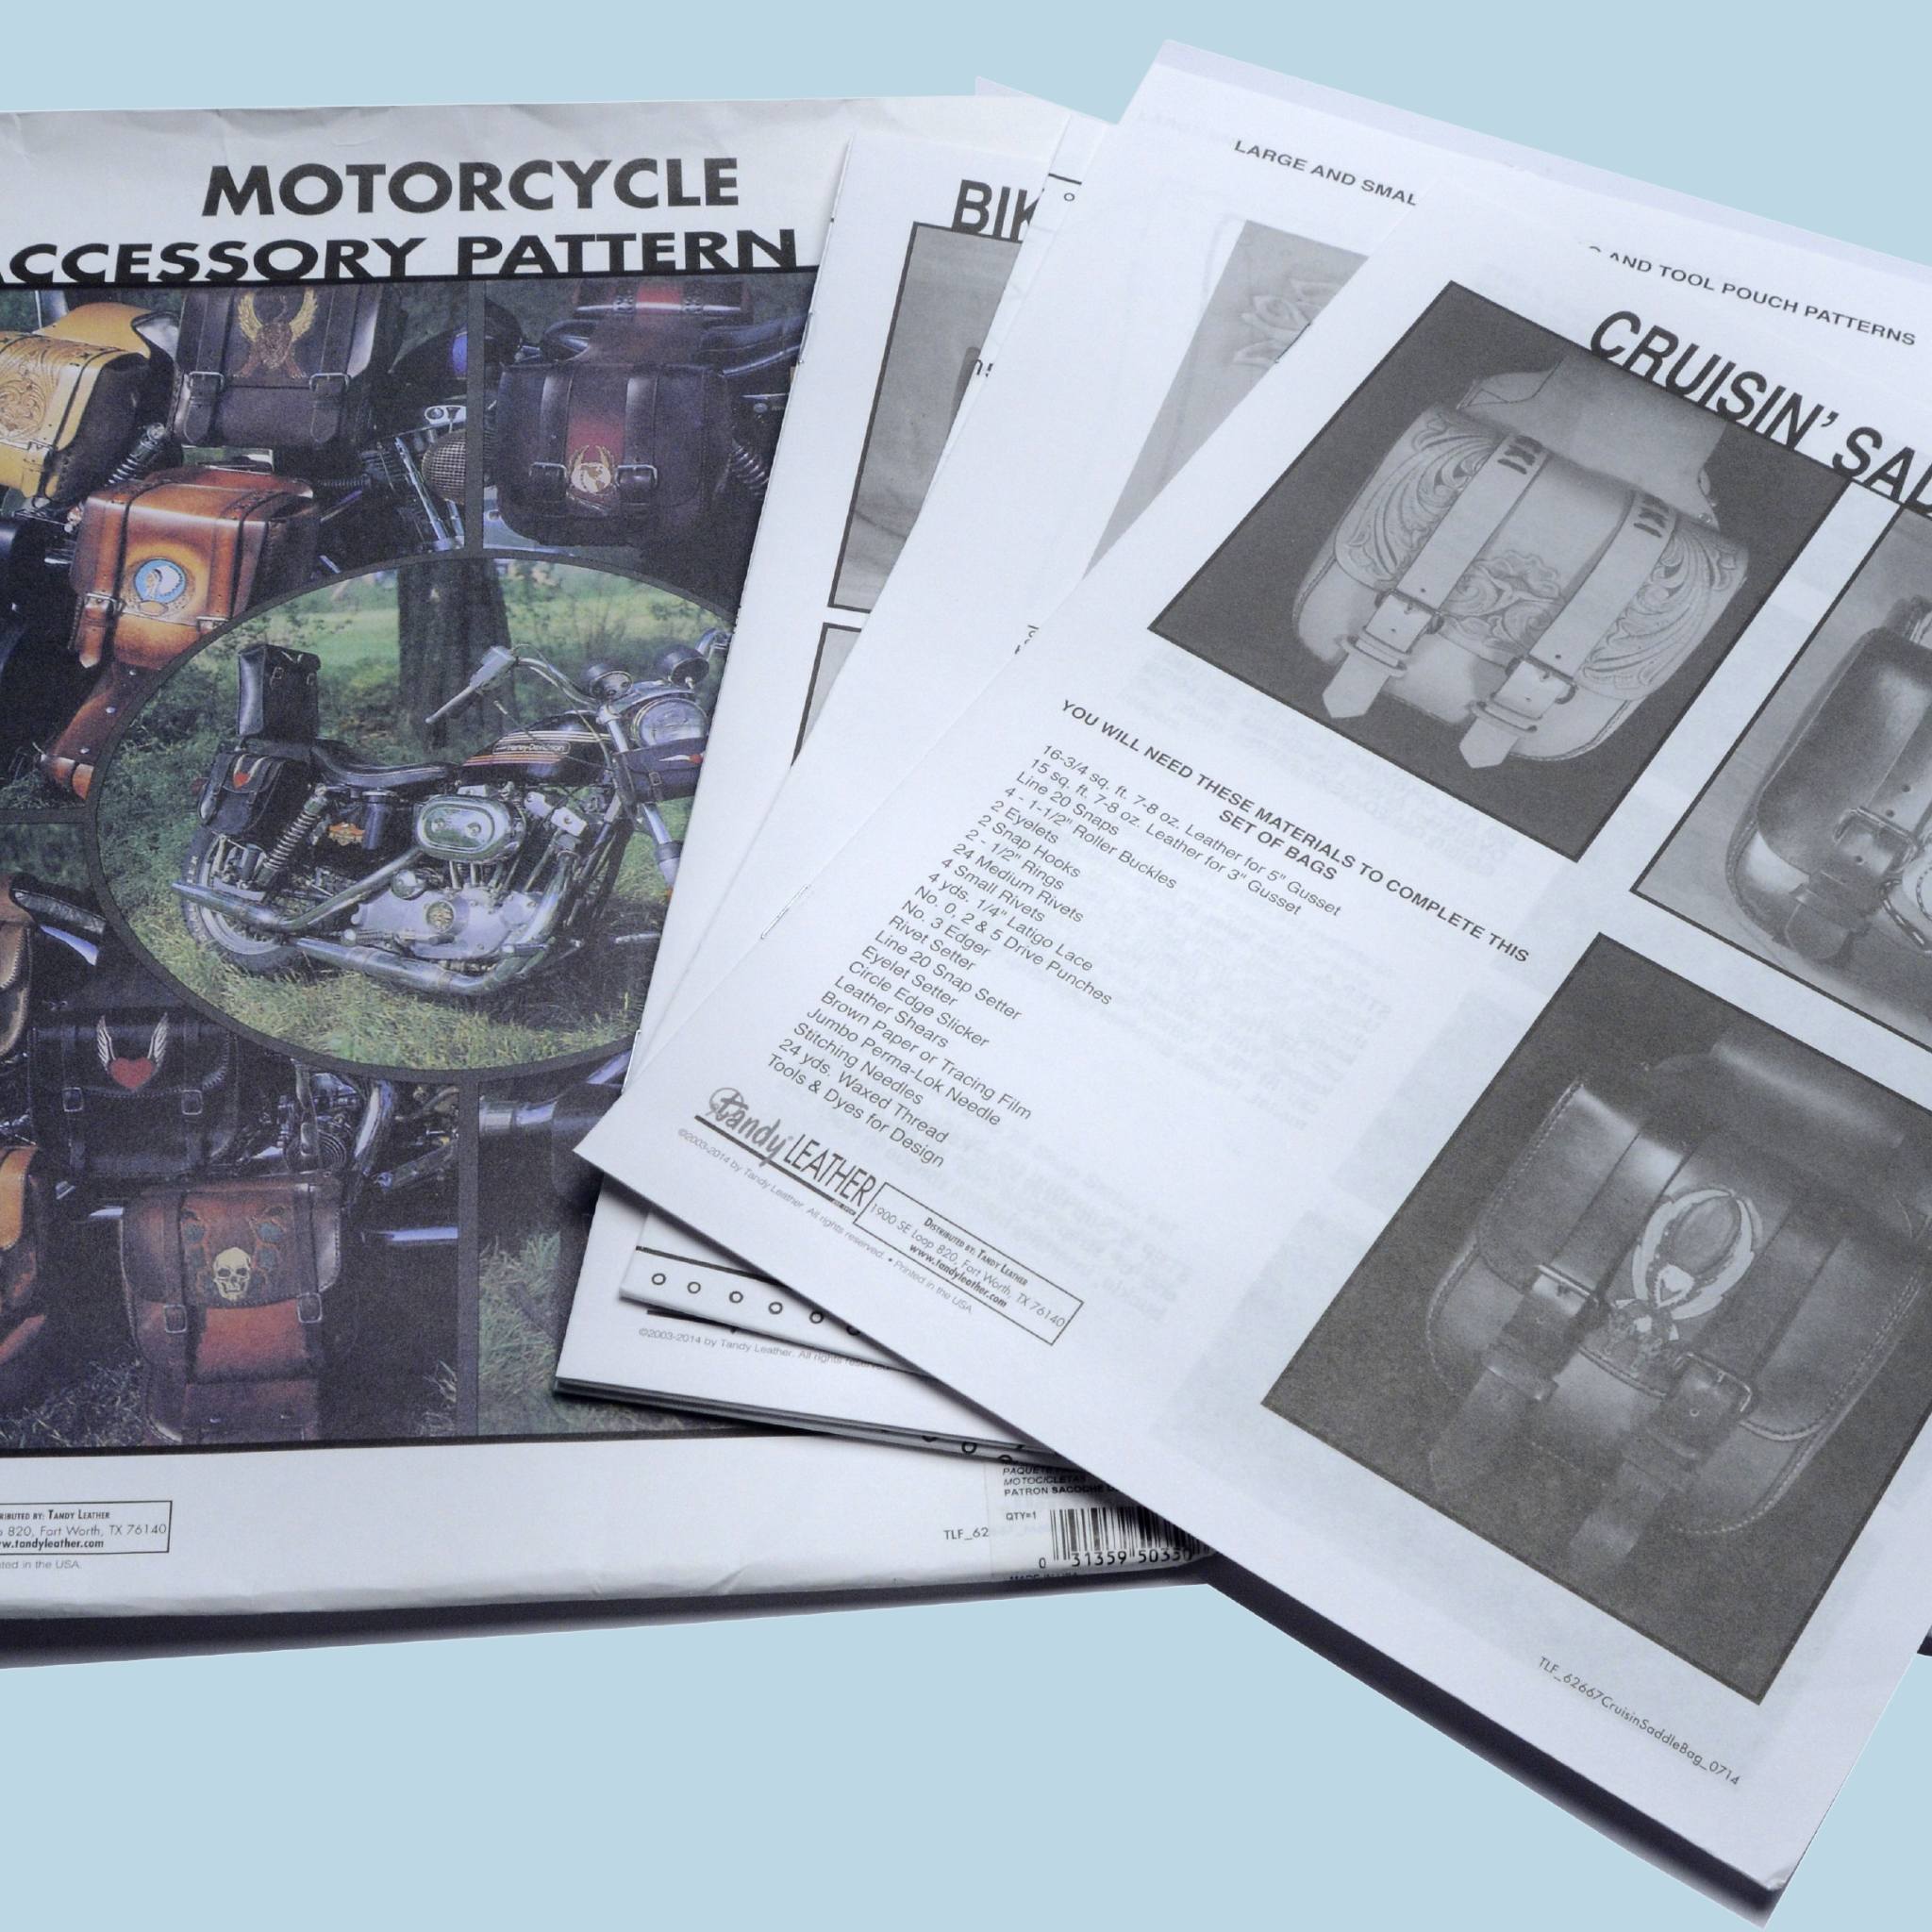 Make your own leather motorcycle accessories with this pattern pack - includes saddle bags and more